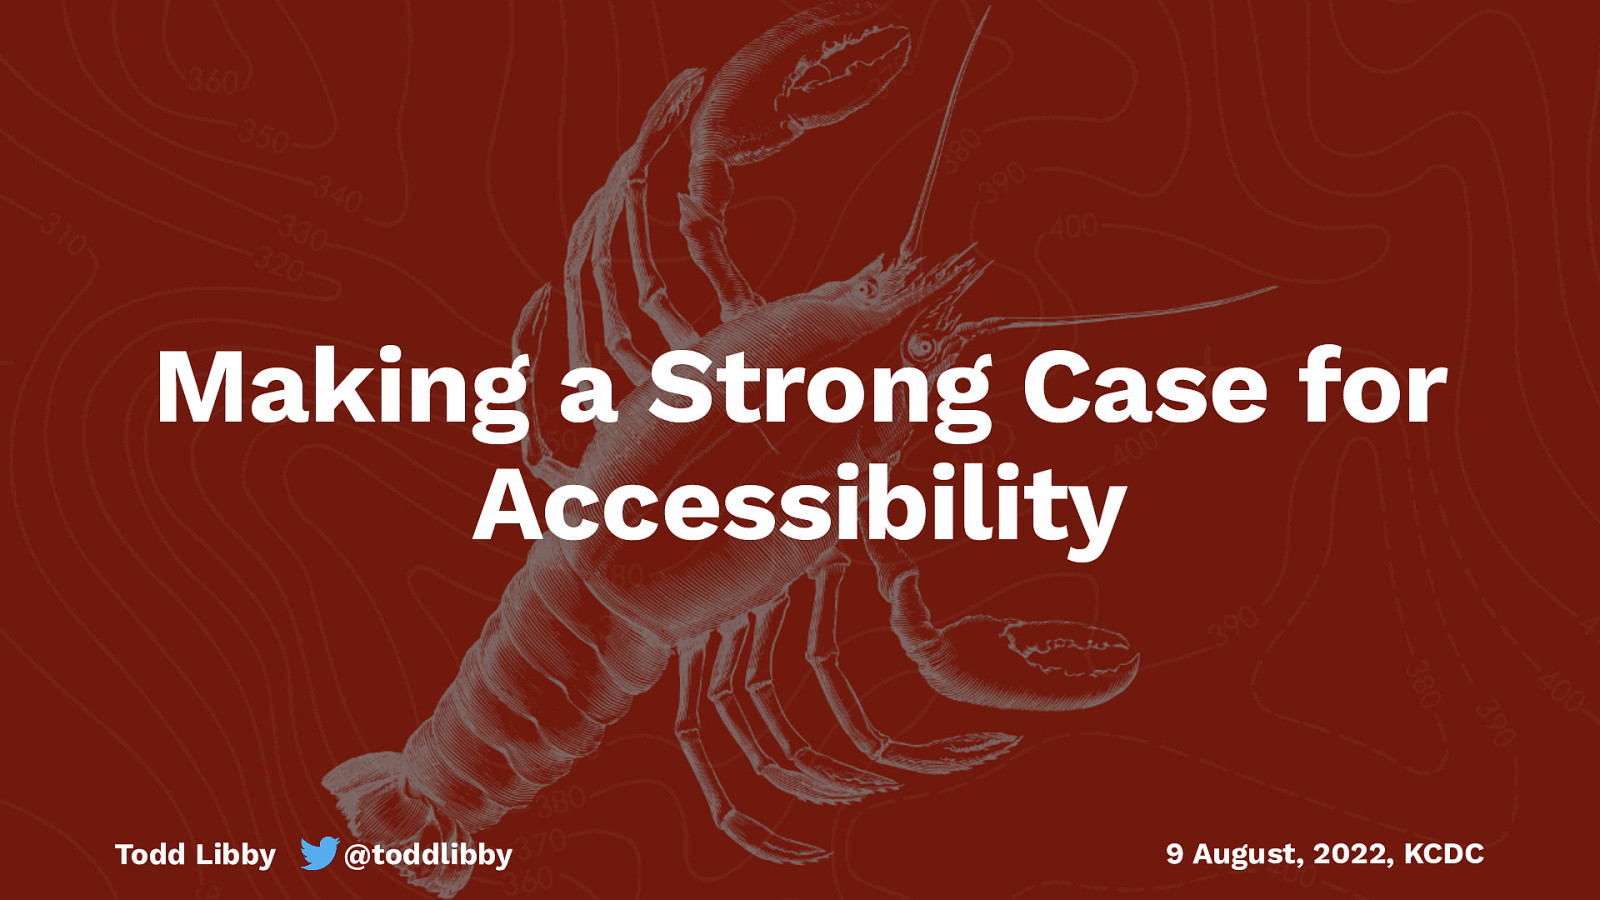 Making the Pragmatic Business Case for Accessibility by Todd Libby